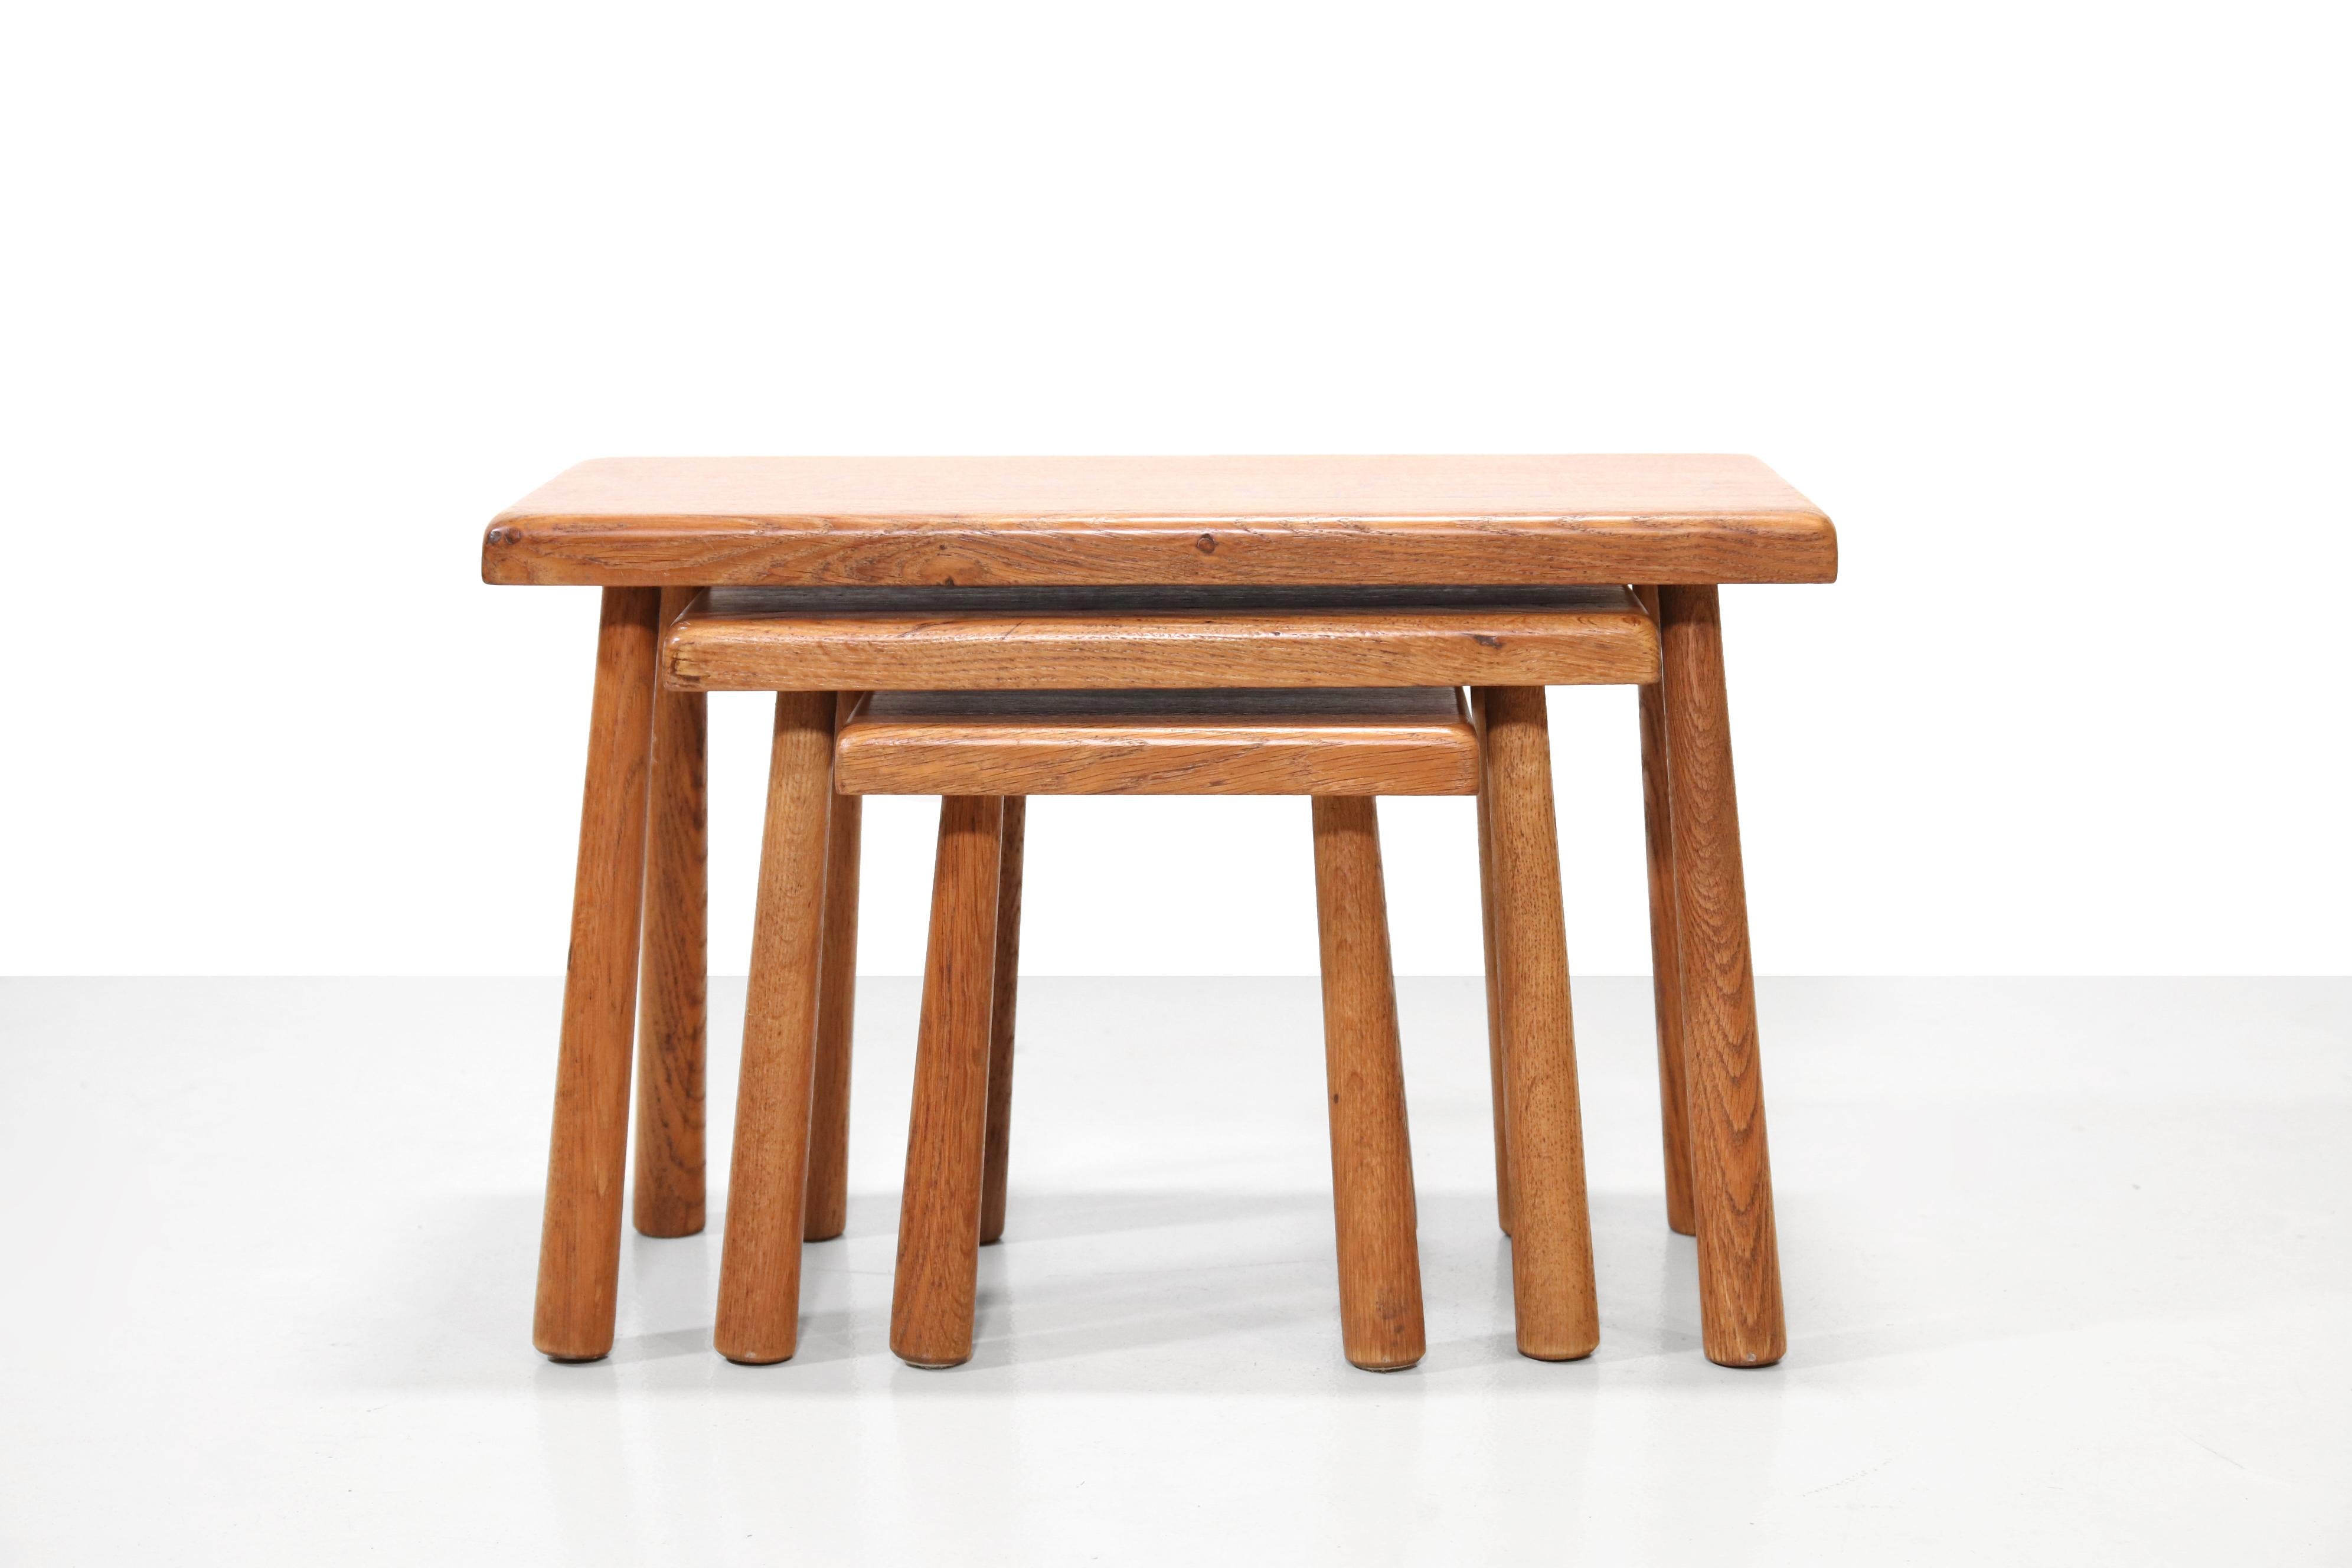 Beautiful set of three solid oak tables. This brutalist set can be conveniently pushed under each other so that they do not take up too much space. They can also be placed separately in the room. The largest table can also function as a bench. The